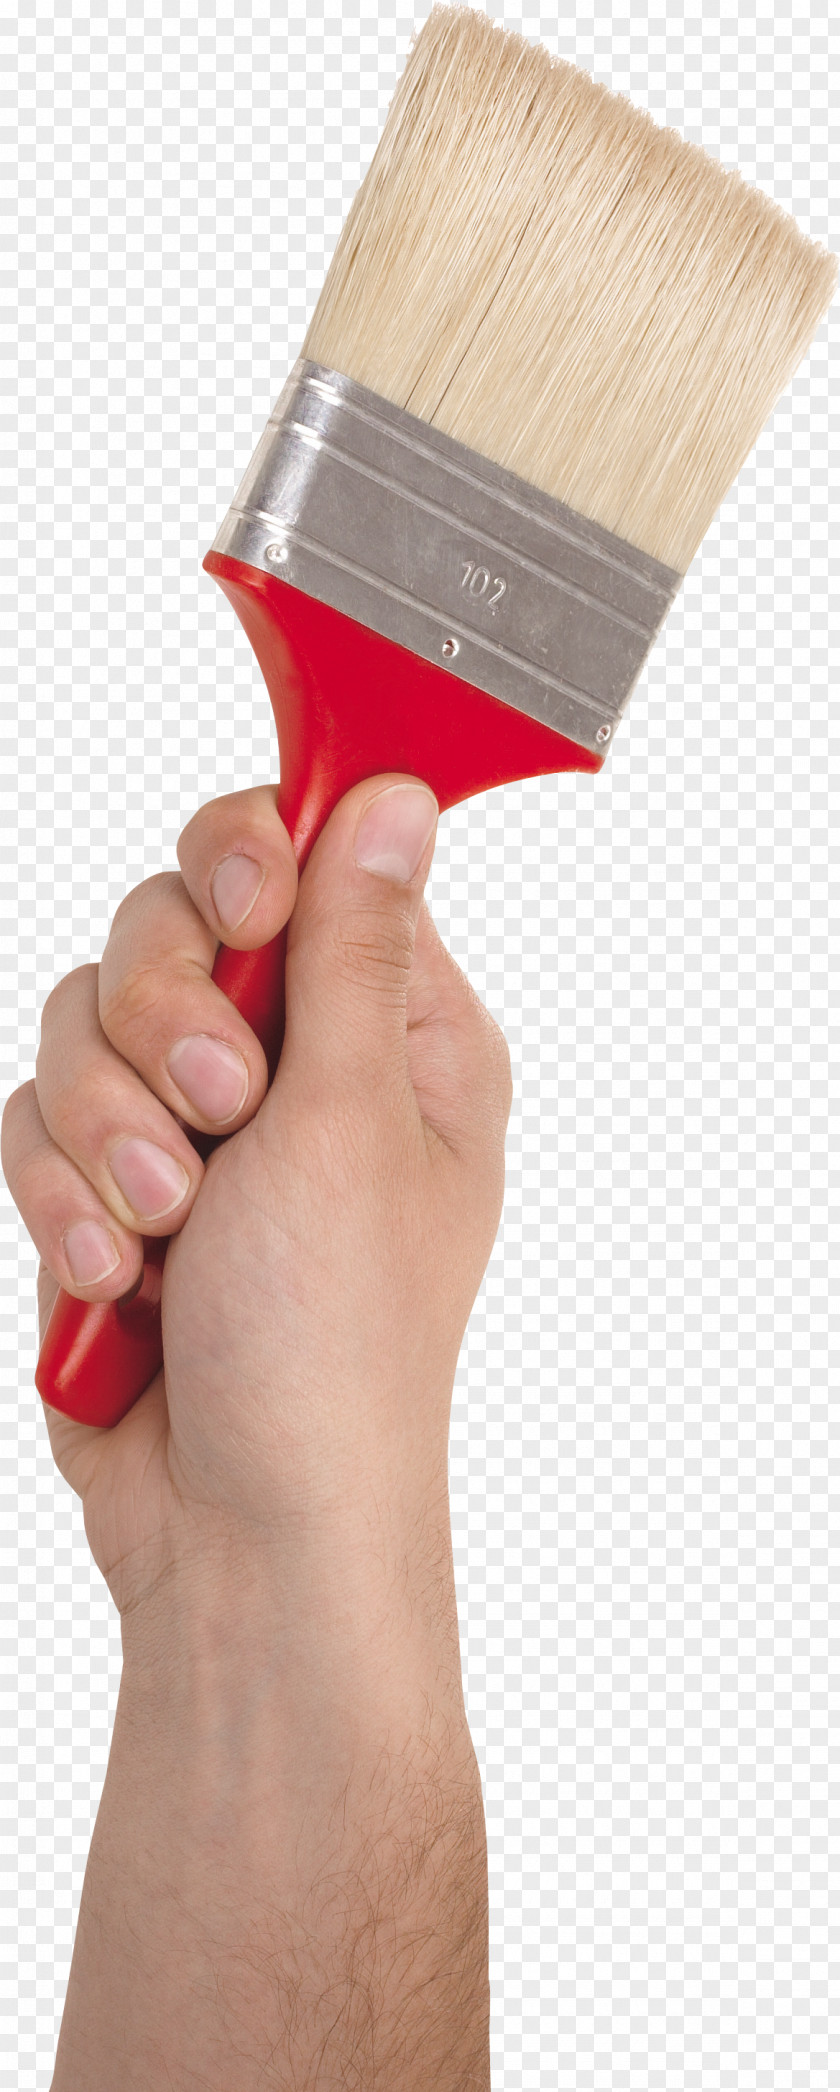 Paint Brush In Hand Image Paintbrush Painting PNG